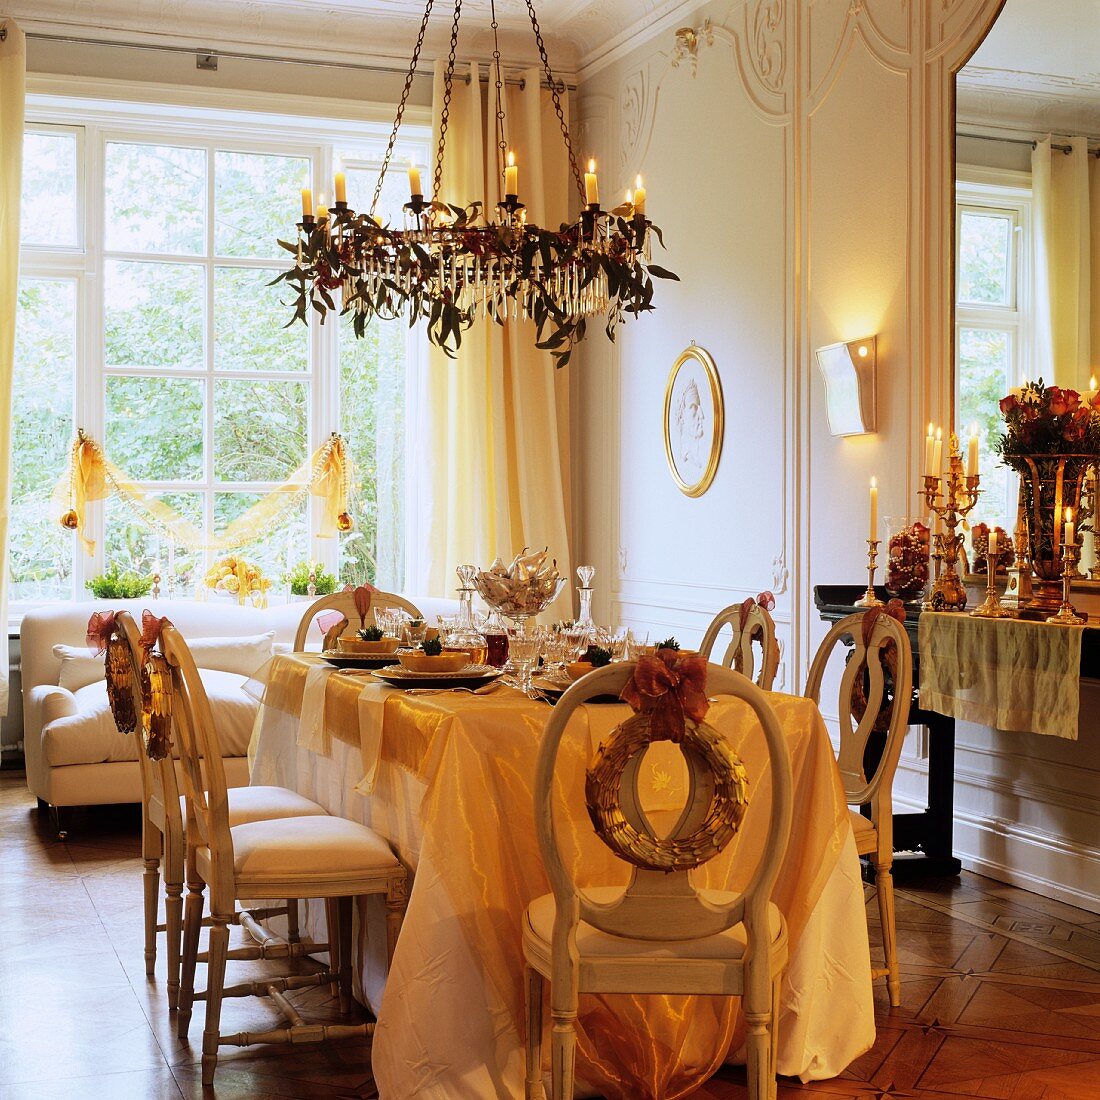 Festively set table below chandelier with lit candles in grand interior